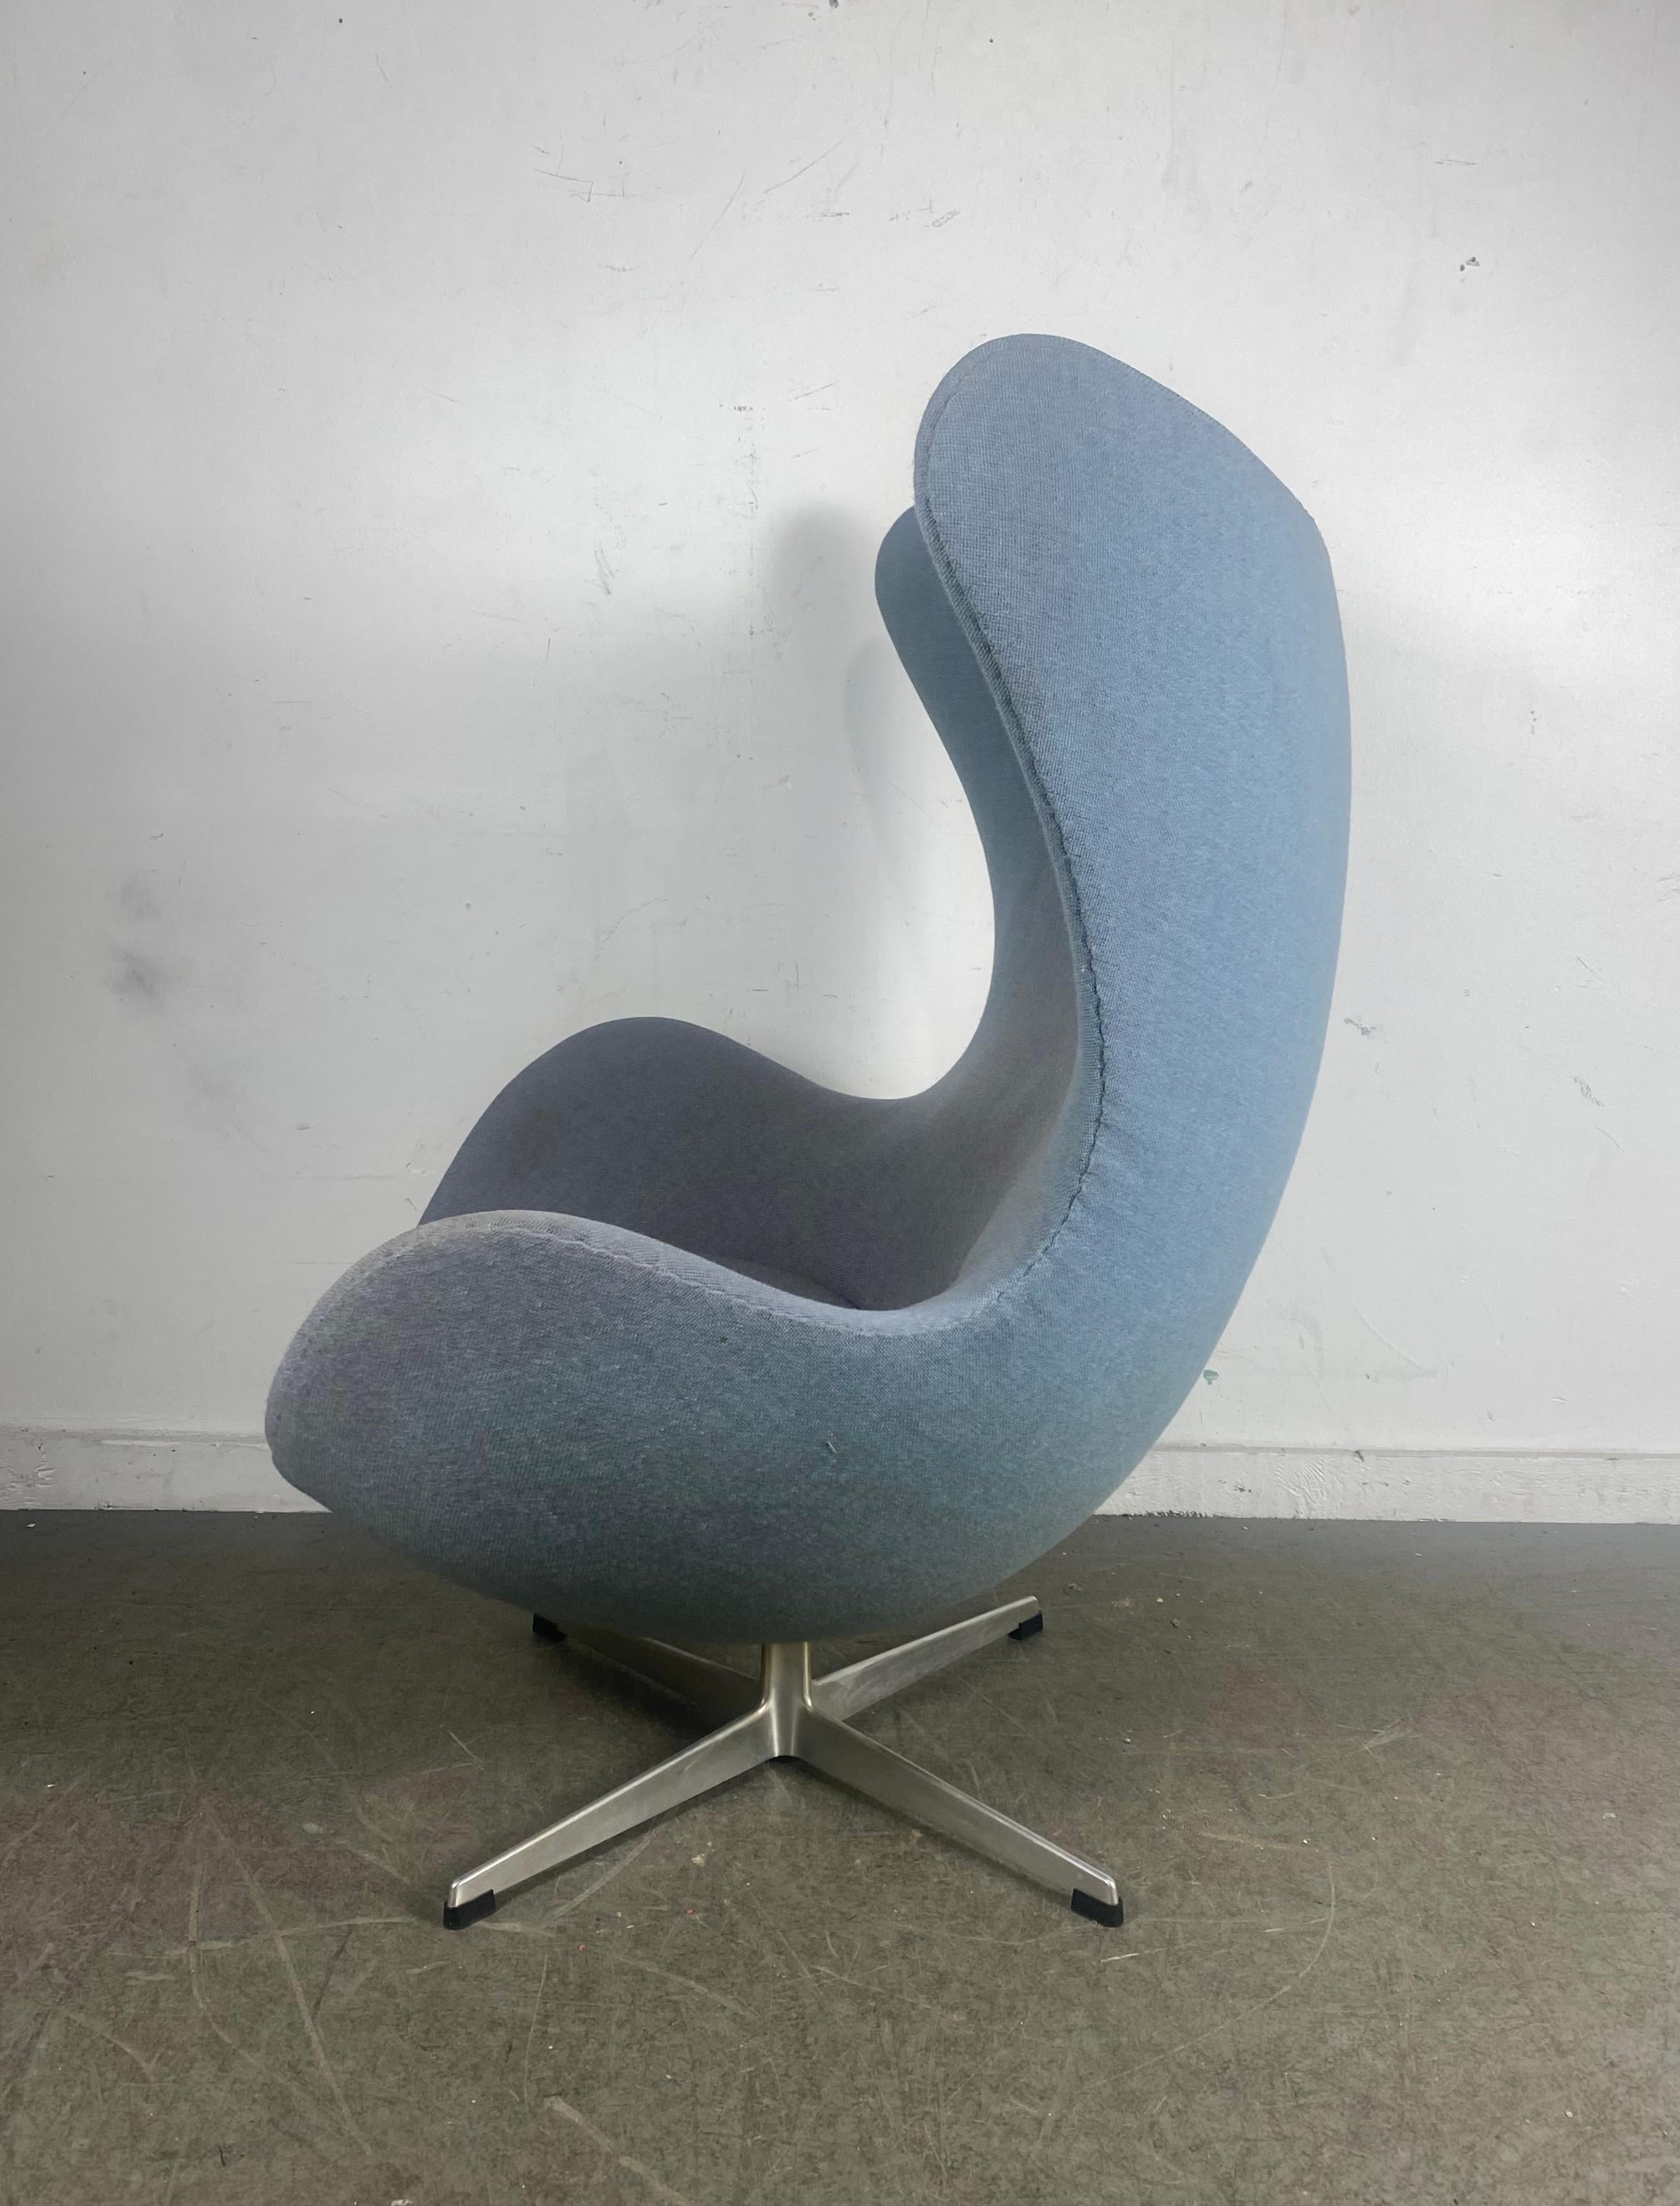 Classic 1960s  Egg Chair designed by Arne Jacobsen for Fritzhansen / Denmark In Good Condition For Sale In Buffalo, NY